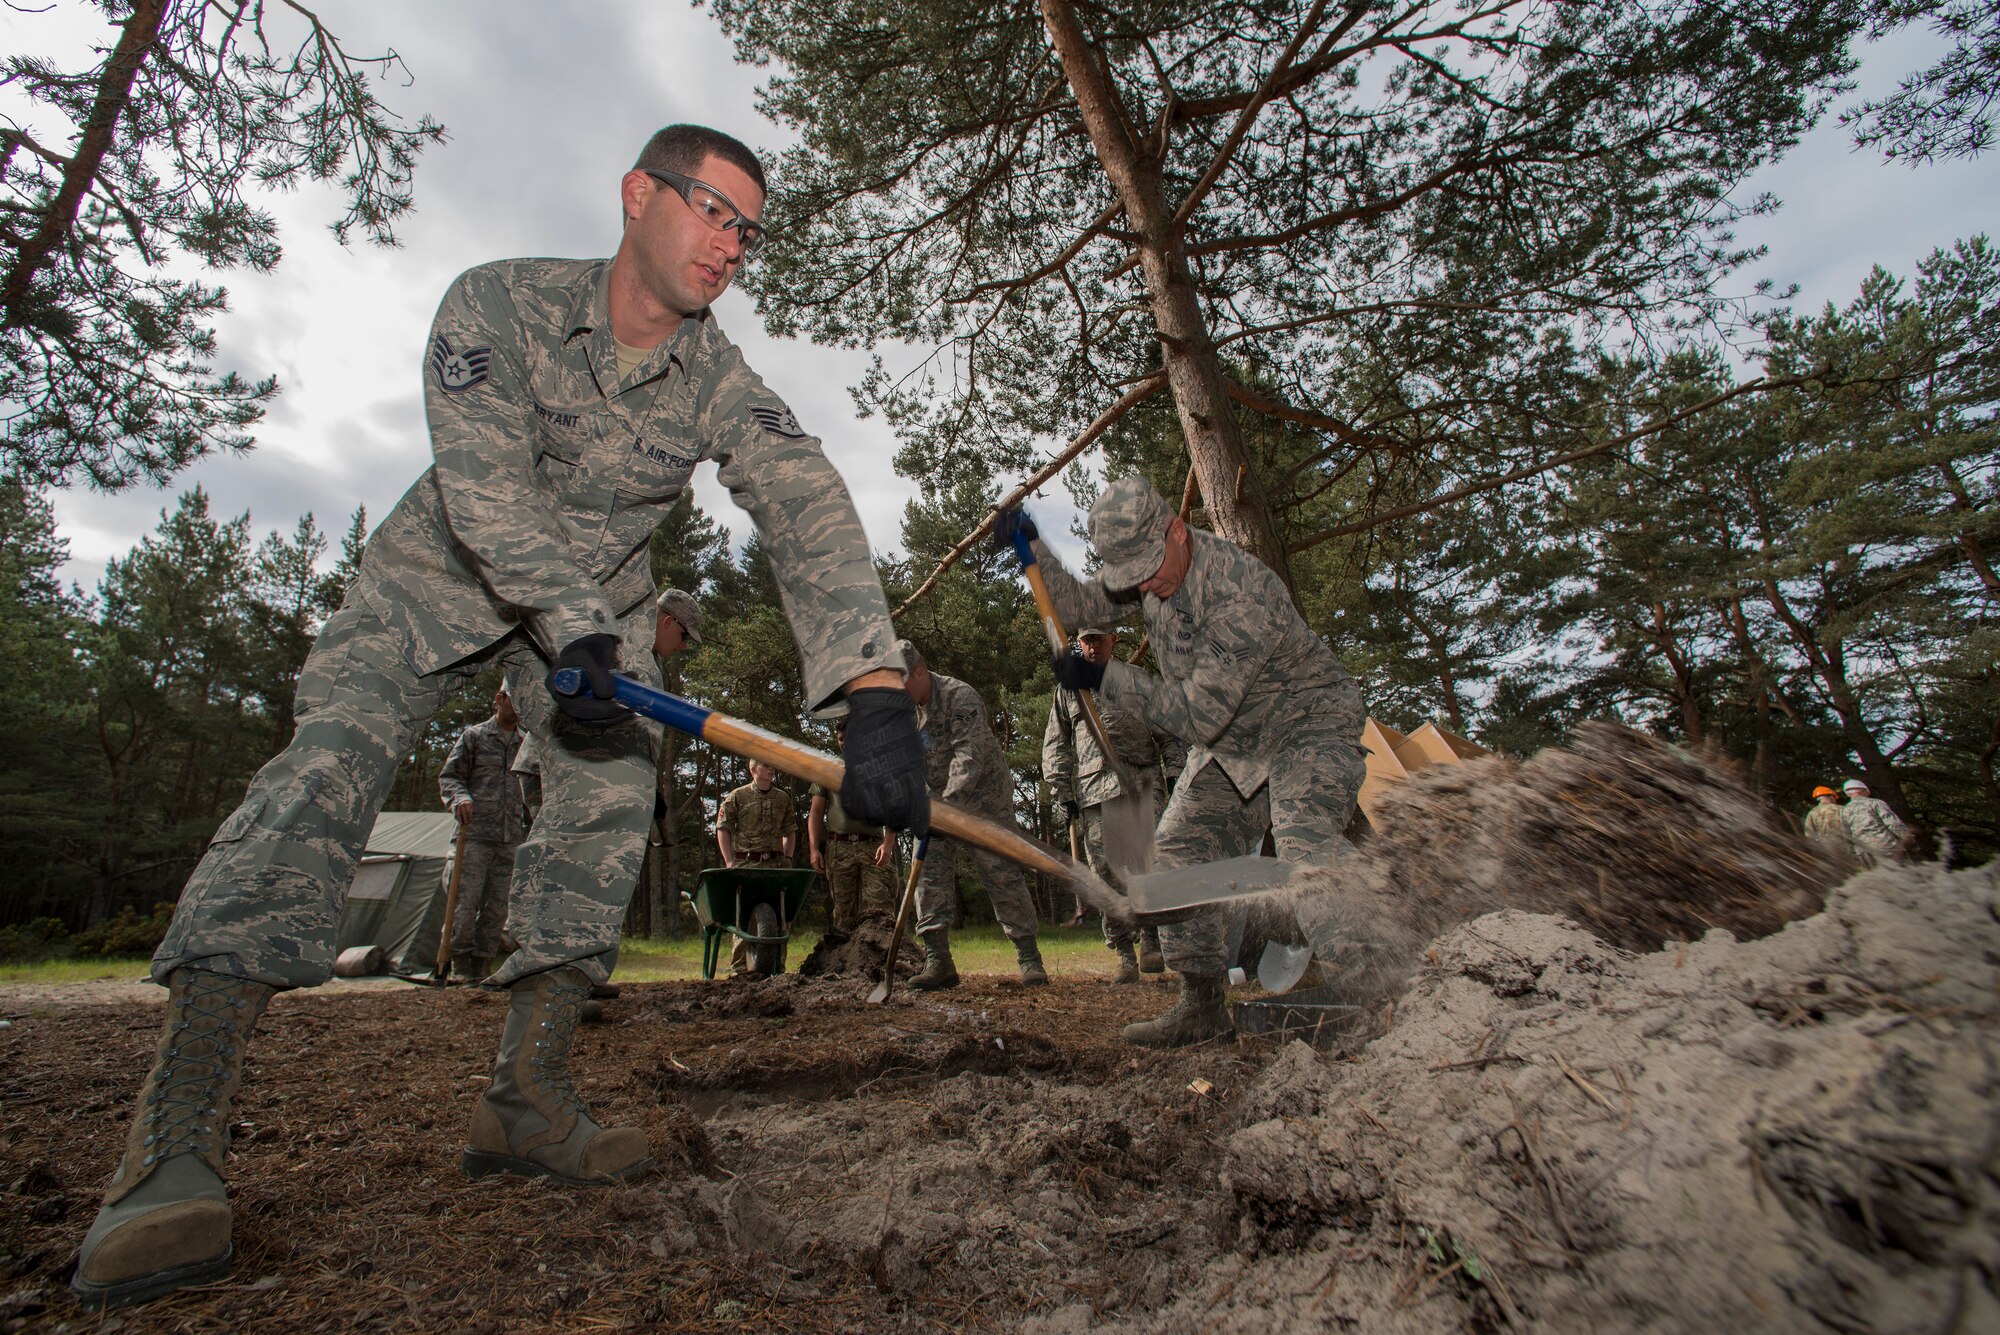 U.S. Air Force Staff Sgt. William Bryant, 140th Civil Engineering Squadron, Colorado Air National Guard, removes soil from an area that will later become a barbecue griller, during a deployed for training trip, known as Exercise Flying Rose at Kinloss Barrack in Forres, Moray, Scotland, United Kingdom, Jun. 11, 2014. Over 40 members of the 140th CES are in Scotland for their annual training and are accomplishing five construction projects that will improve several areas around Kinloss Barracks, during Exercise Flying Rose hosted by the British Army before returning back to Colorado later this month. (U.S. Air National Guard photo/Tech. Sgt. Wolfram M. Stumpf)